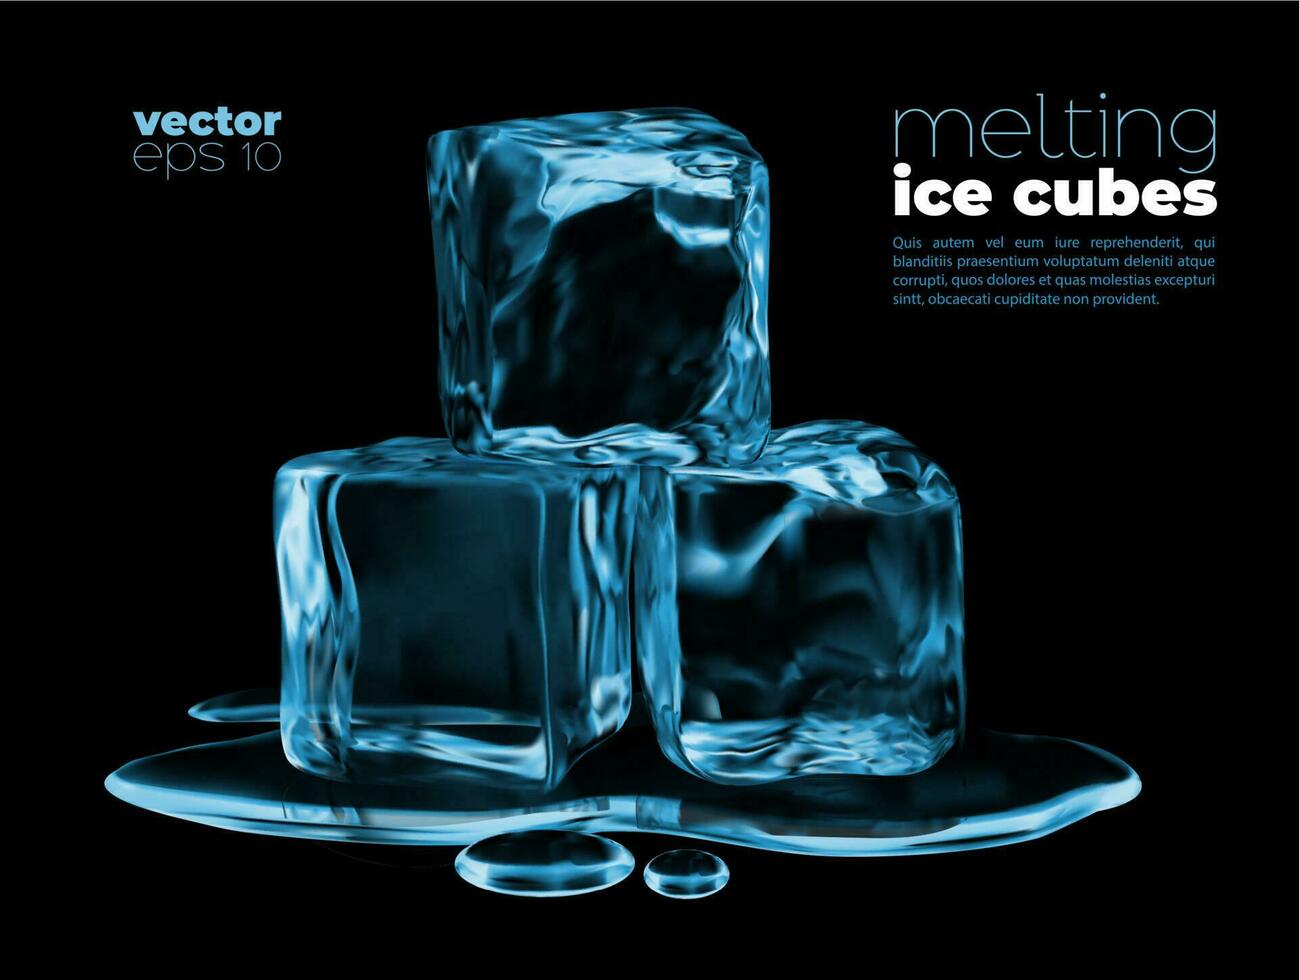 Melting ice cubes, blue water puddle, frozen drink vector